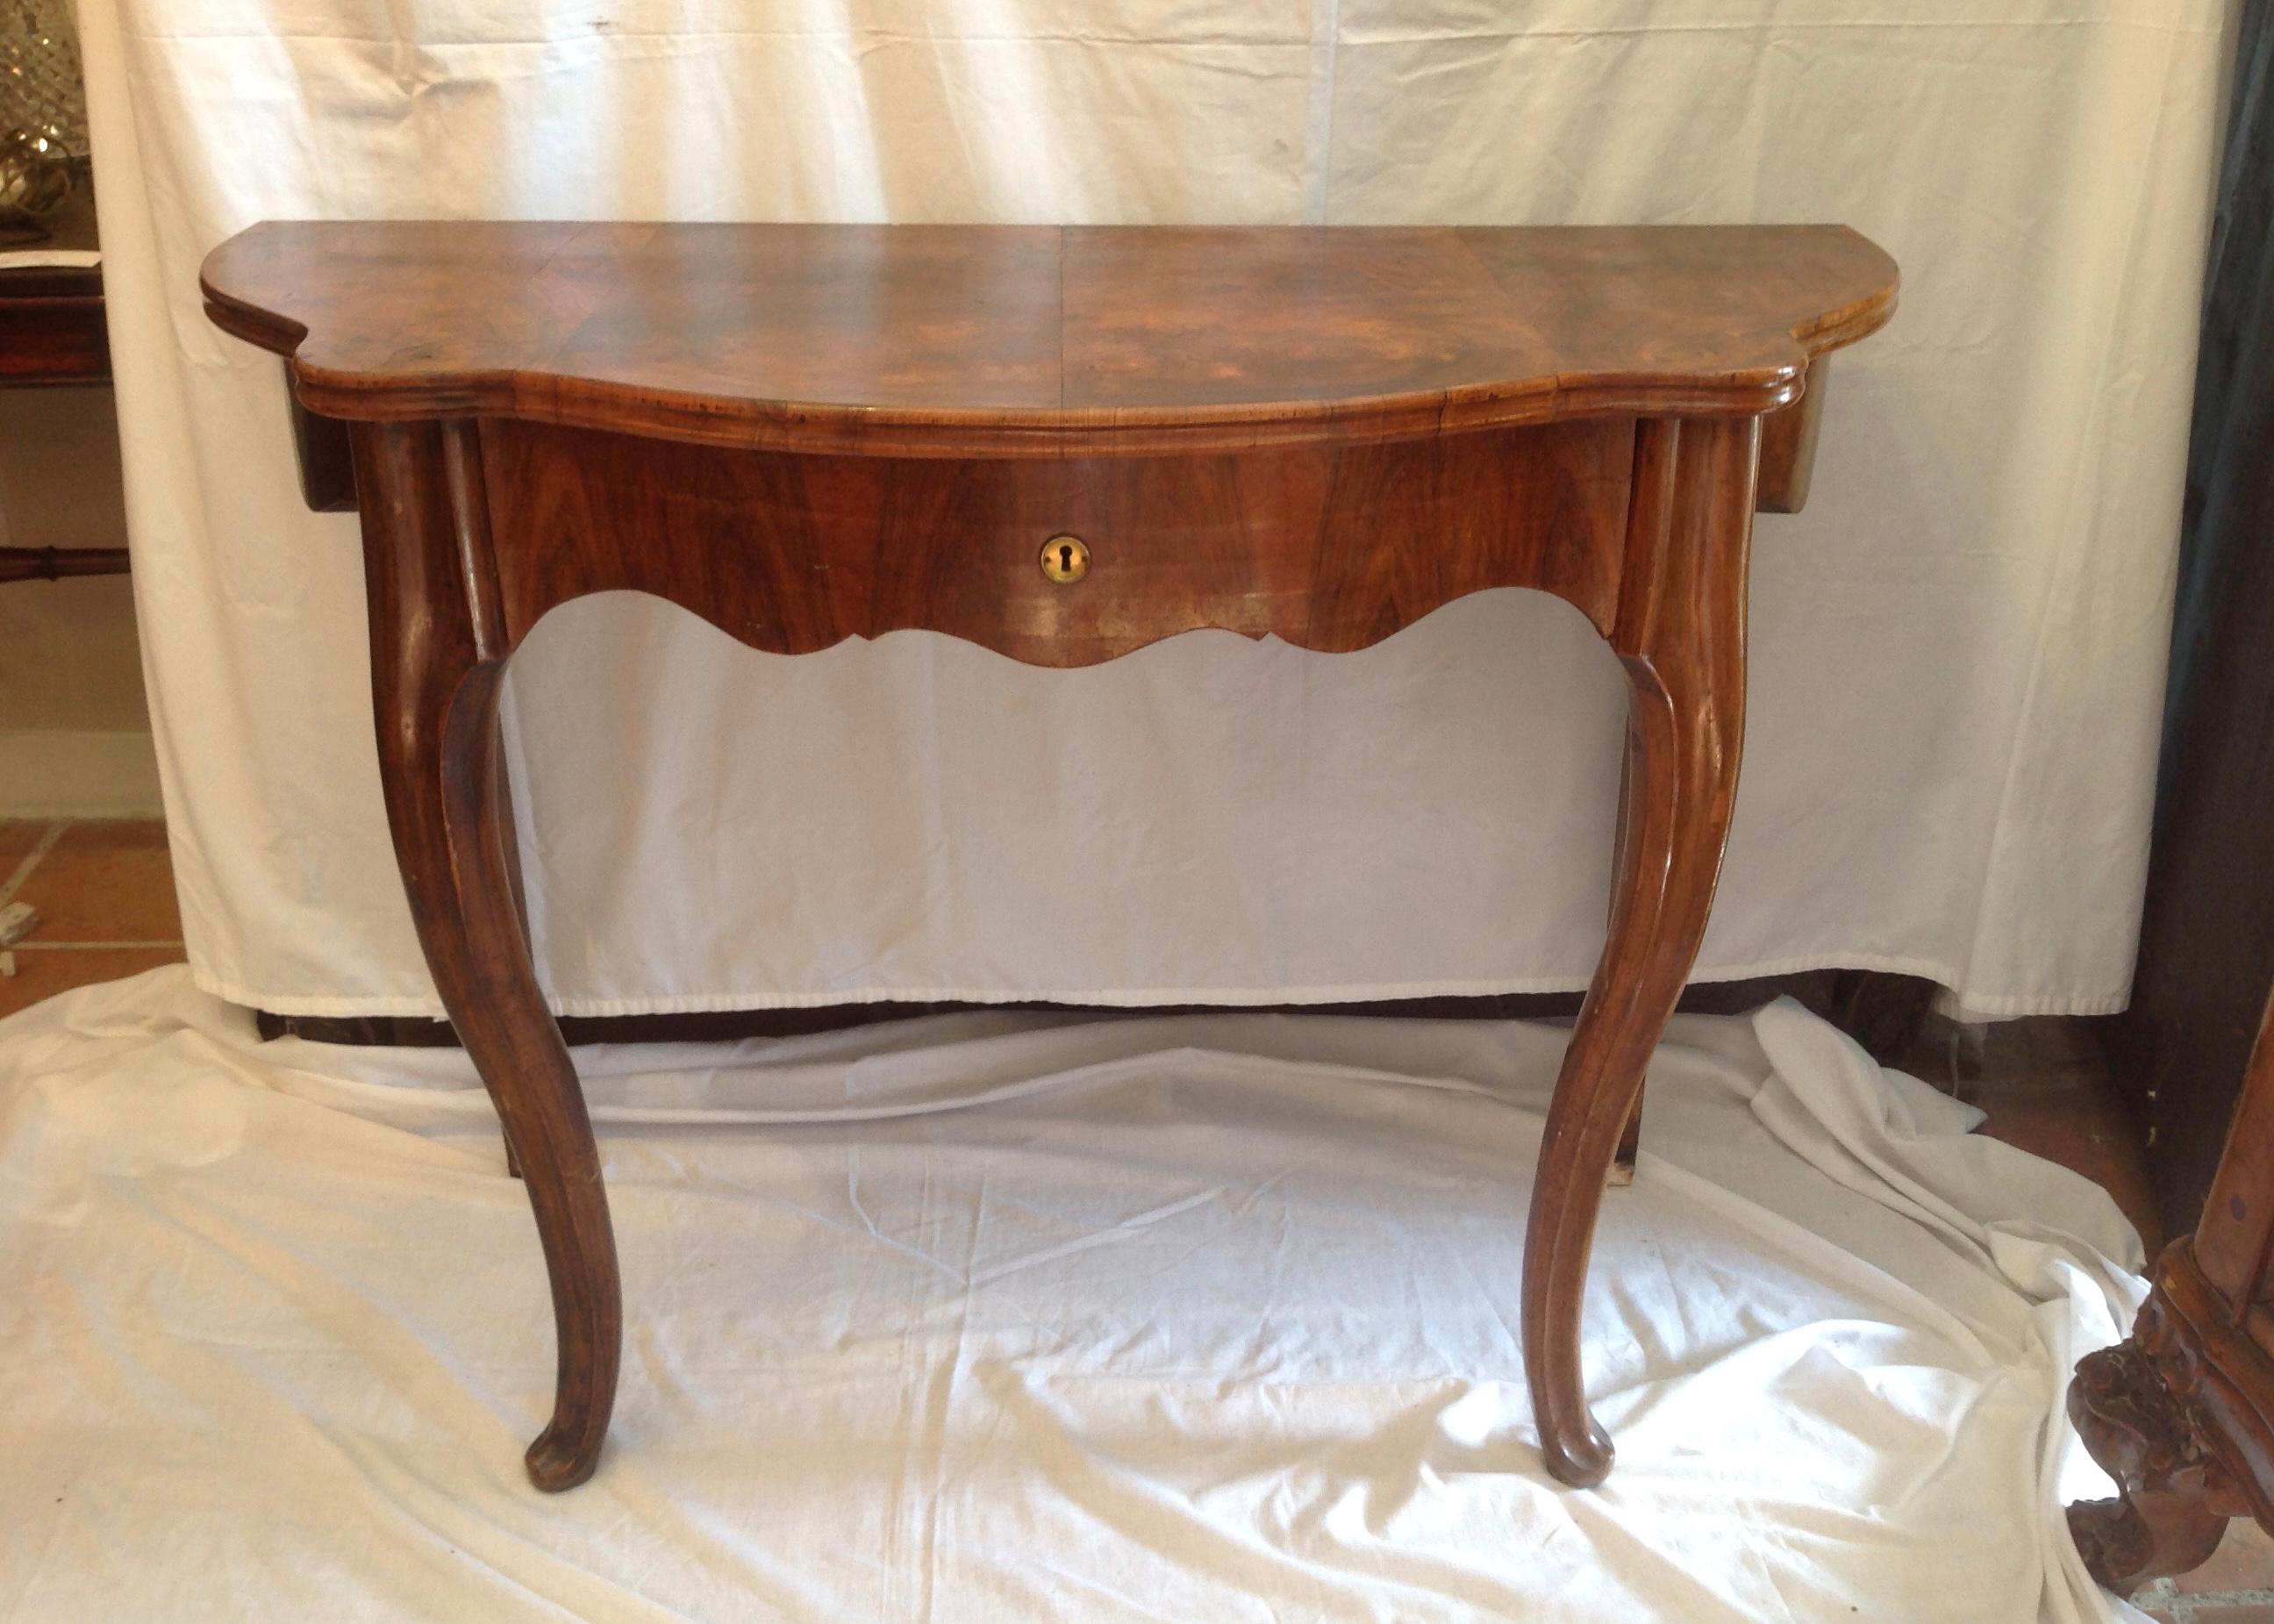 This is a very fine early 1800s French walnut console table in very good condition with the original patina sitting on cabriole legs.
There is a single drawer to the front with dovetail joints and runs fine.
Beautiful quality, scale, and graceful